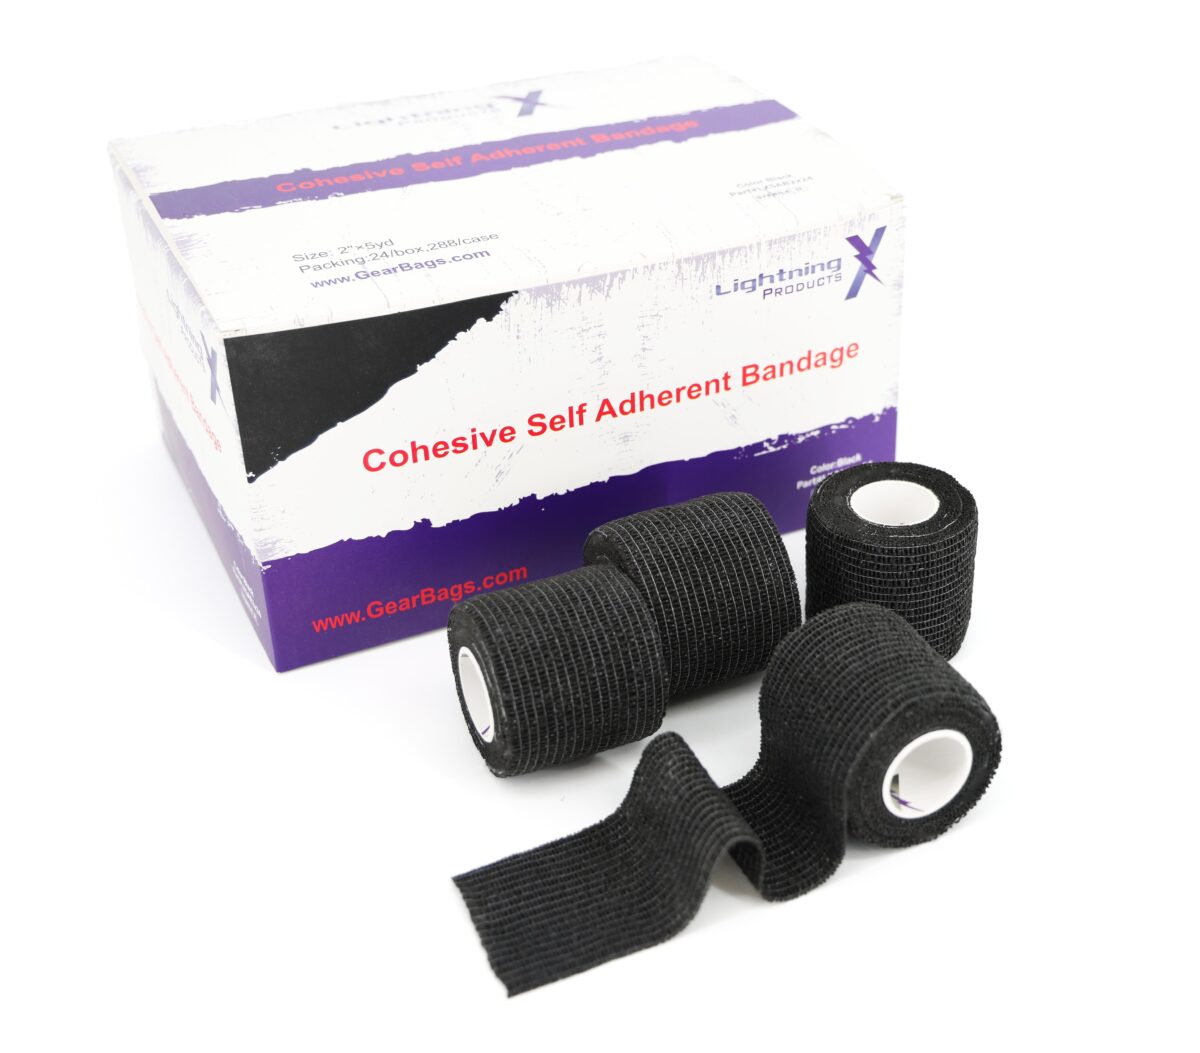 lightning x tactical black cohesive self adherent bandage wrap gauze 2" x 5 yards cling roll, great for first aid, tattoo and medical emergencies